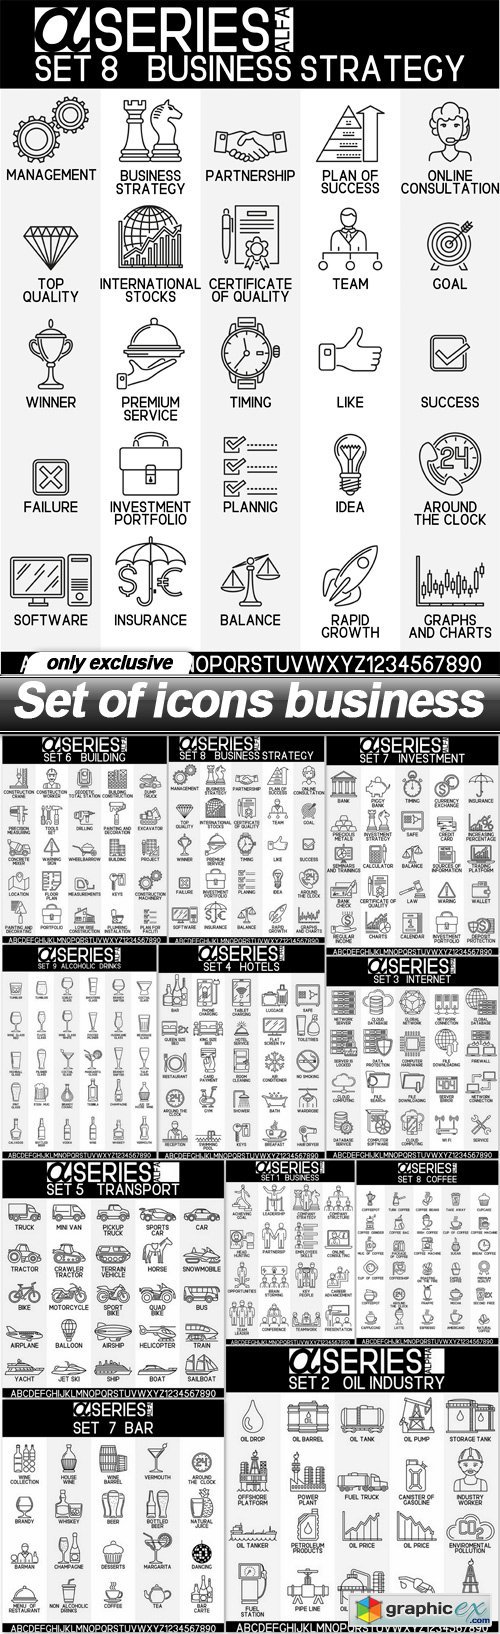 Set of icons business - 11 EPS